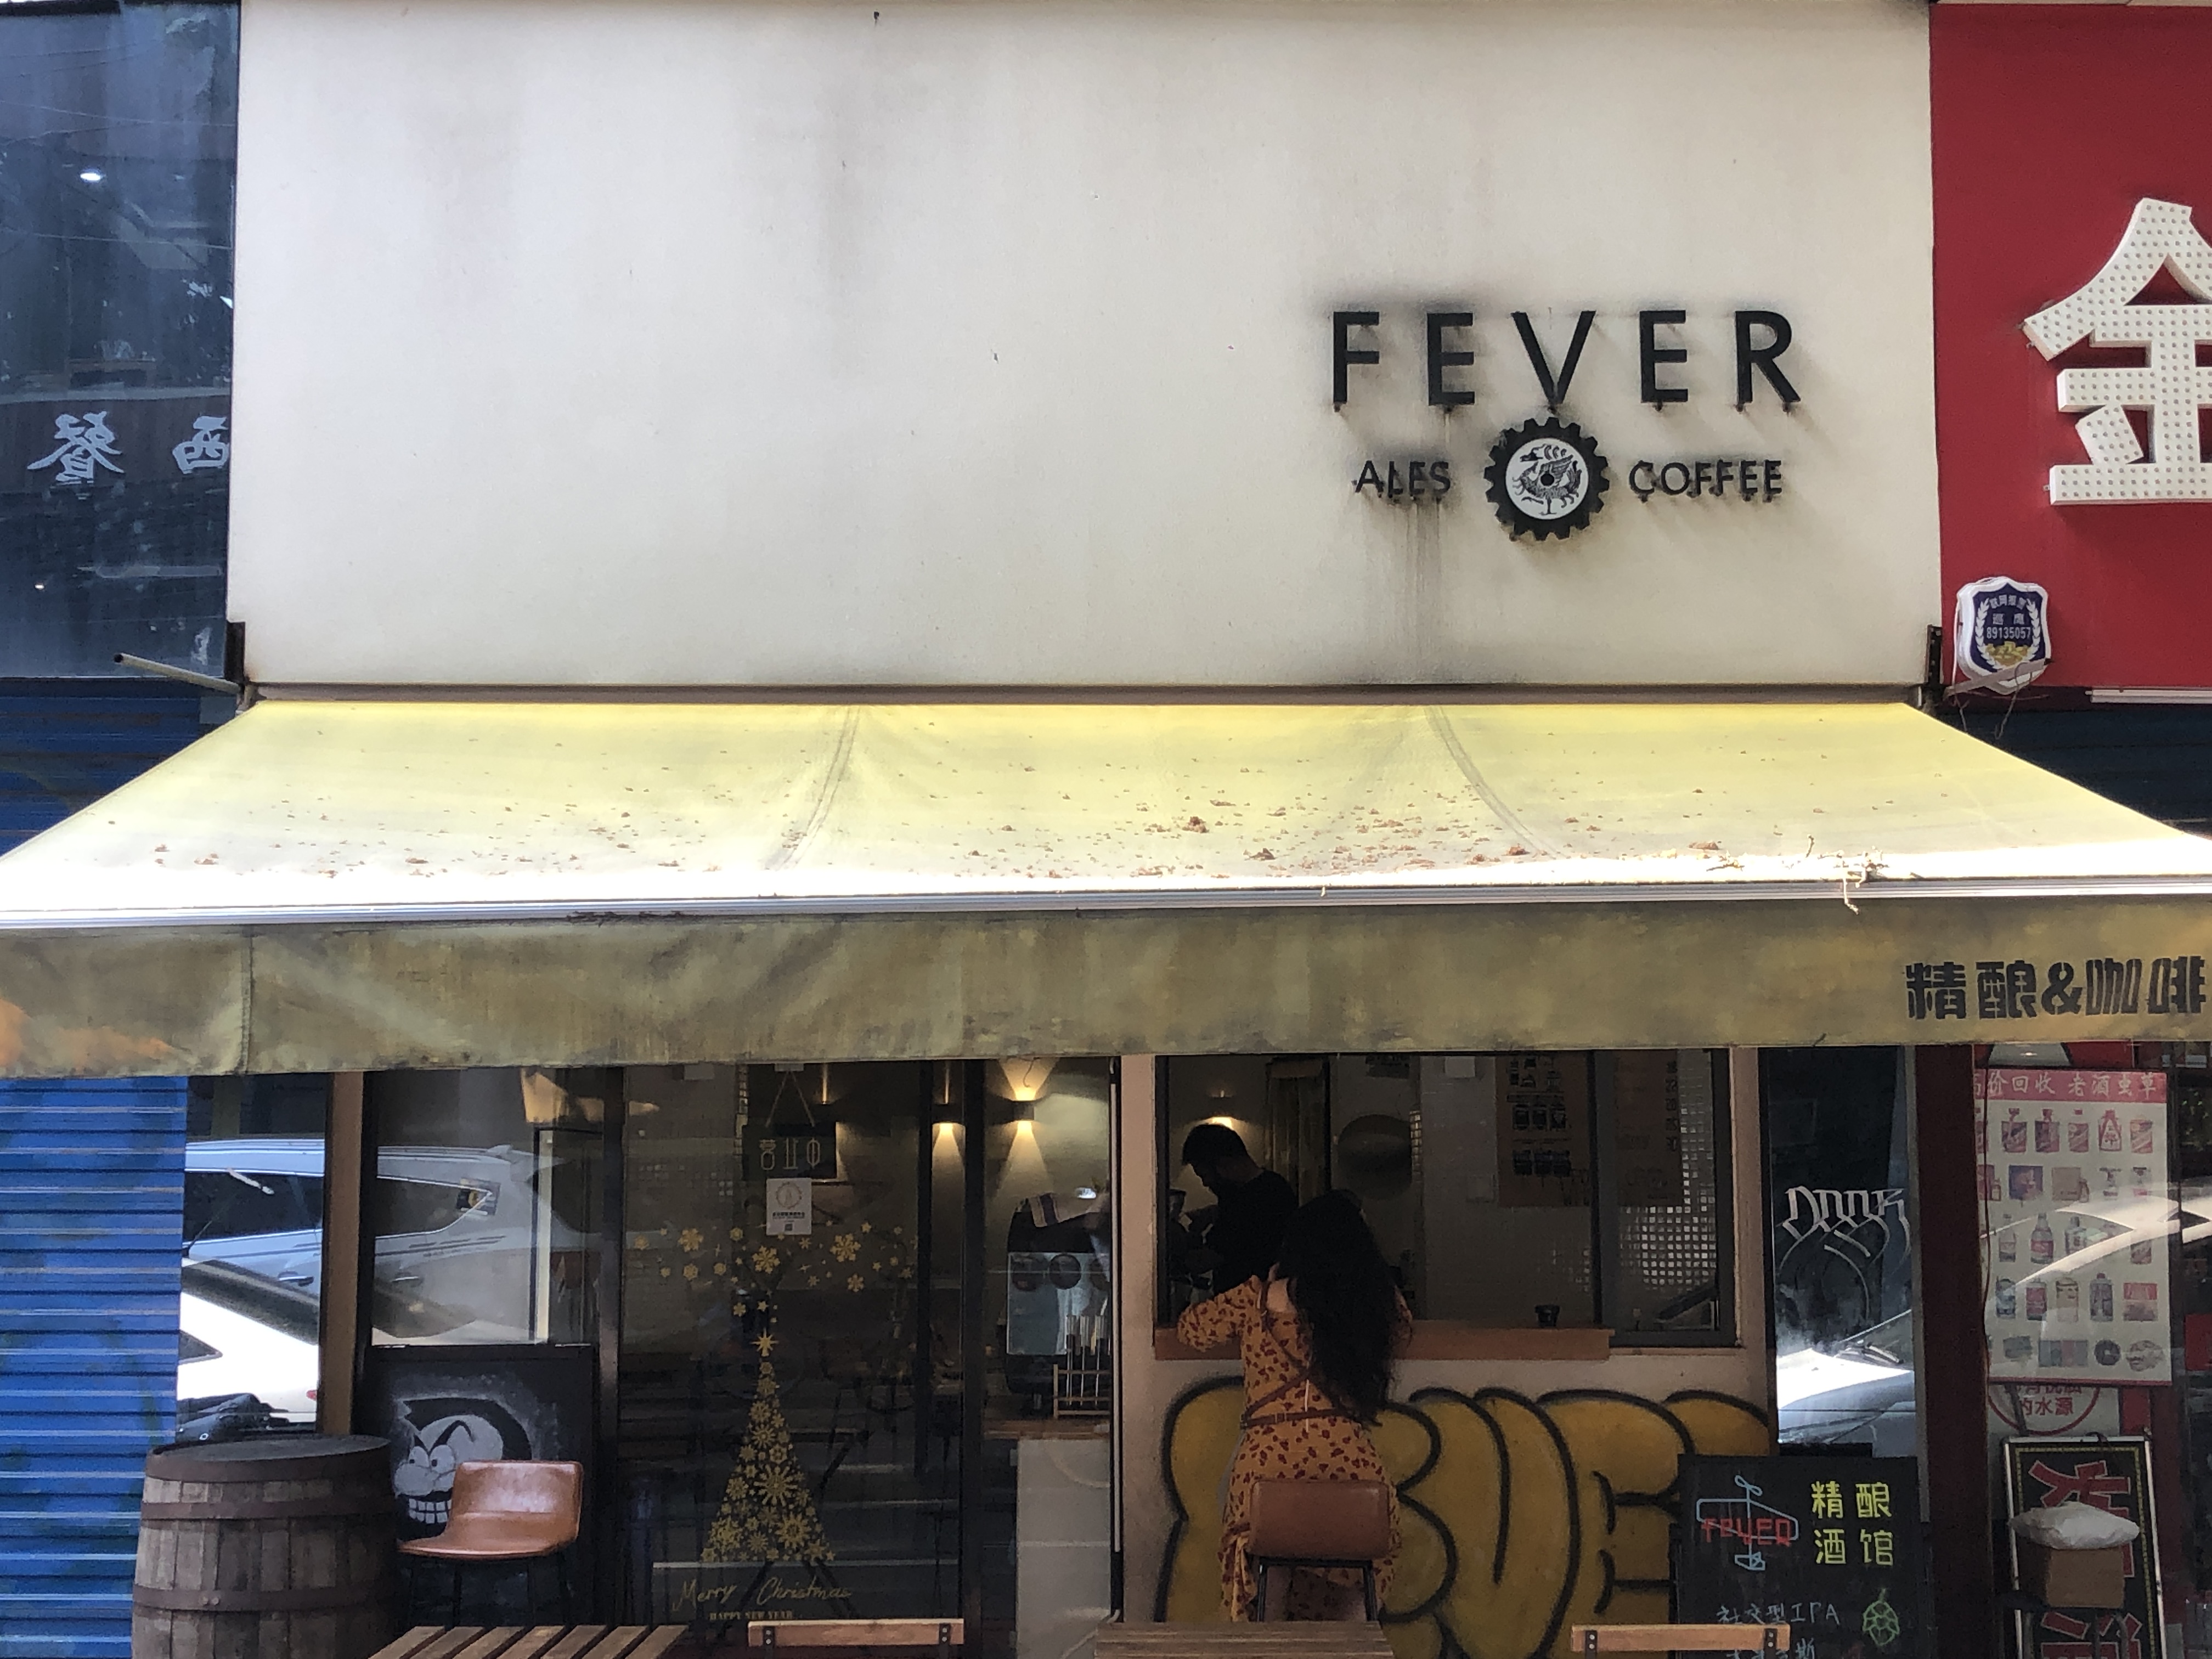 Fever ales coffee 123 1